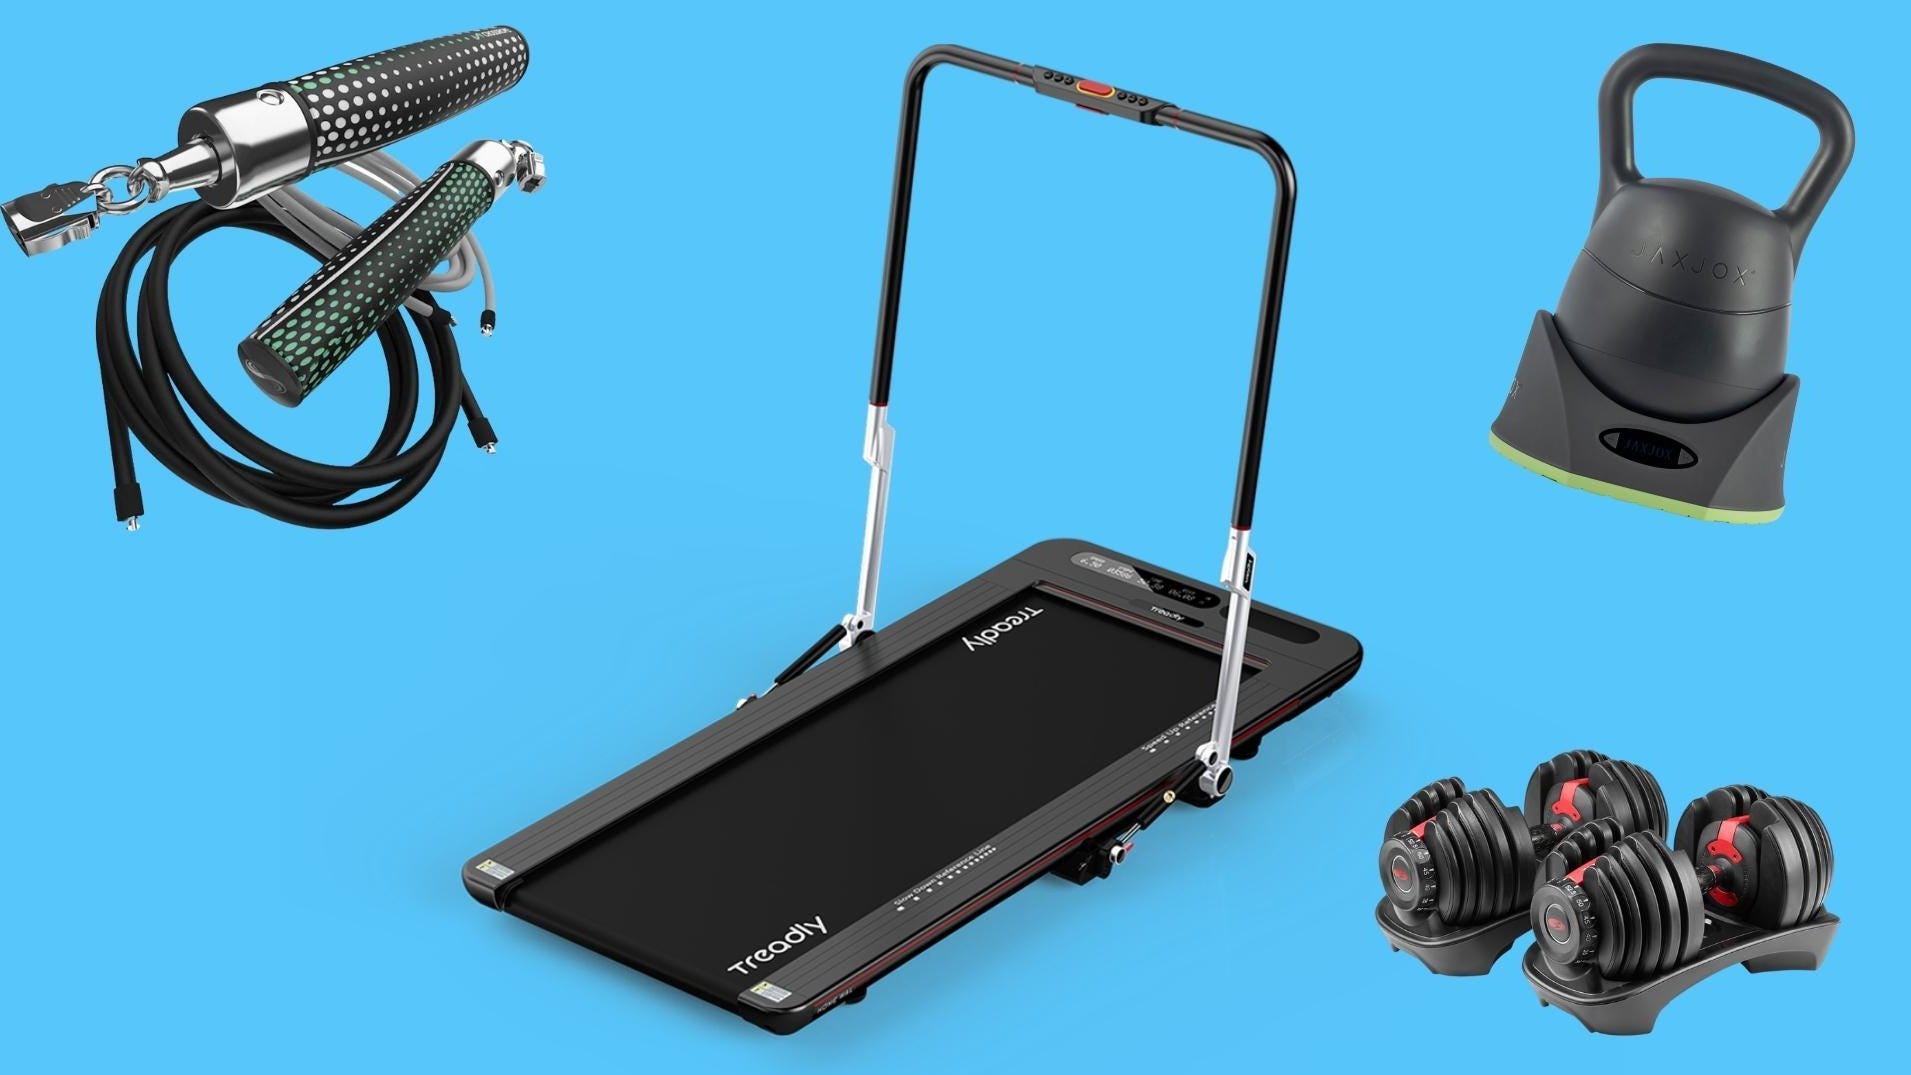 Short on space? Try working out with this compact exercise equipment